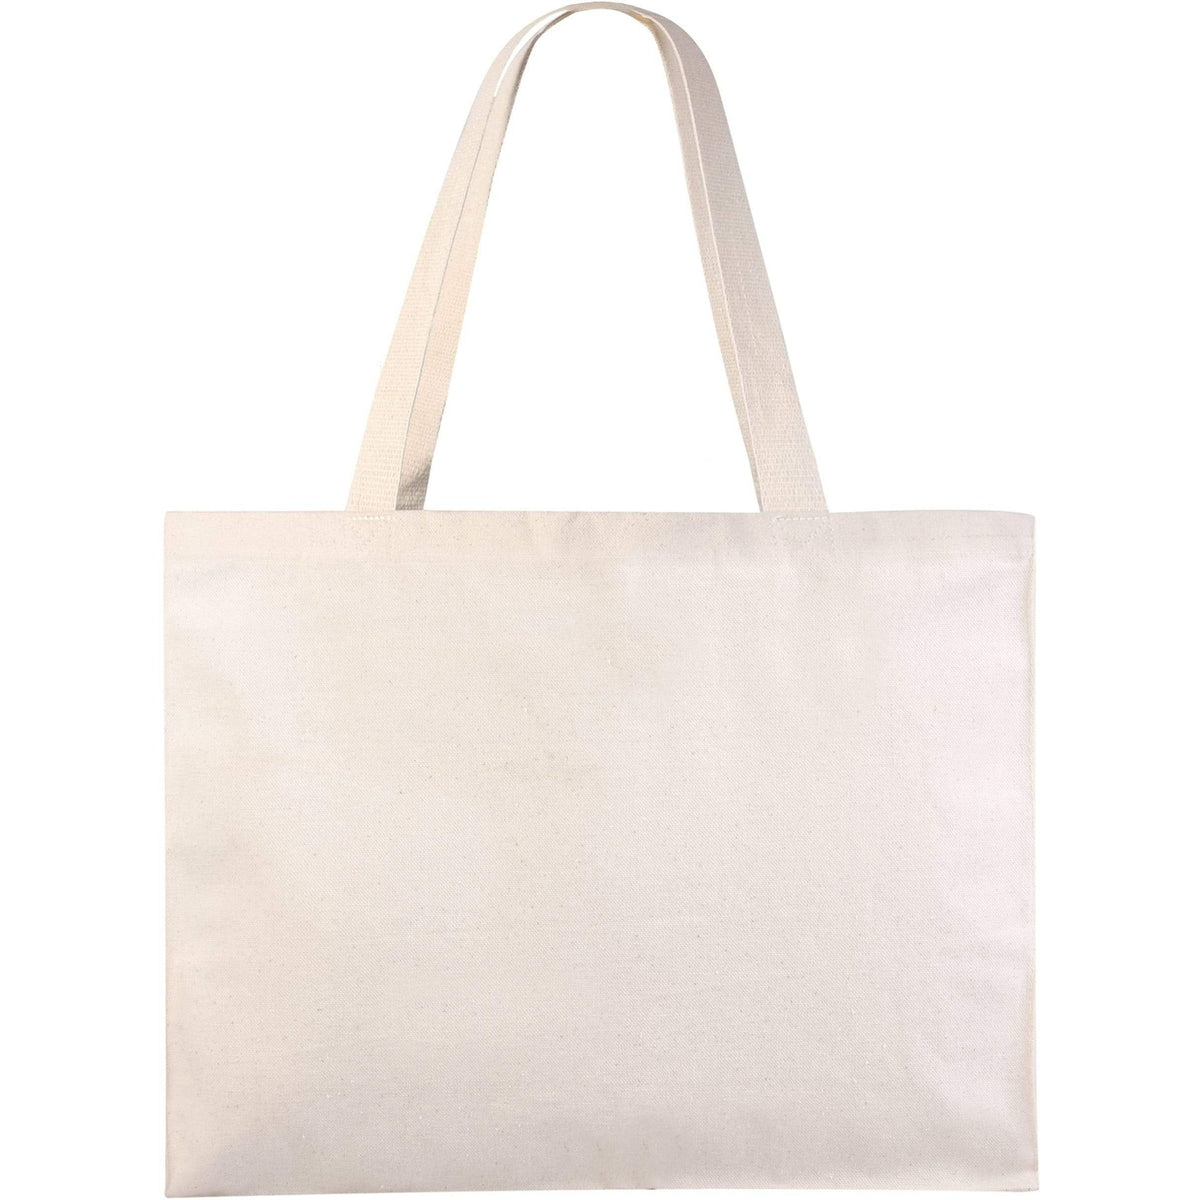 Wholesale Canvas Bags & Blank Canvas Tote Bags with Gusset – BagzDepot™